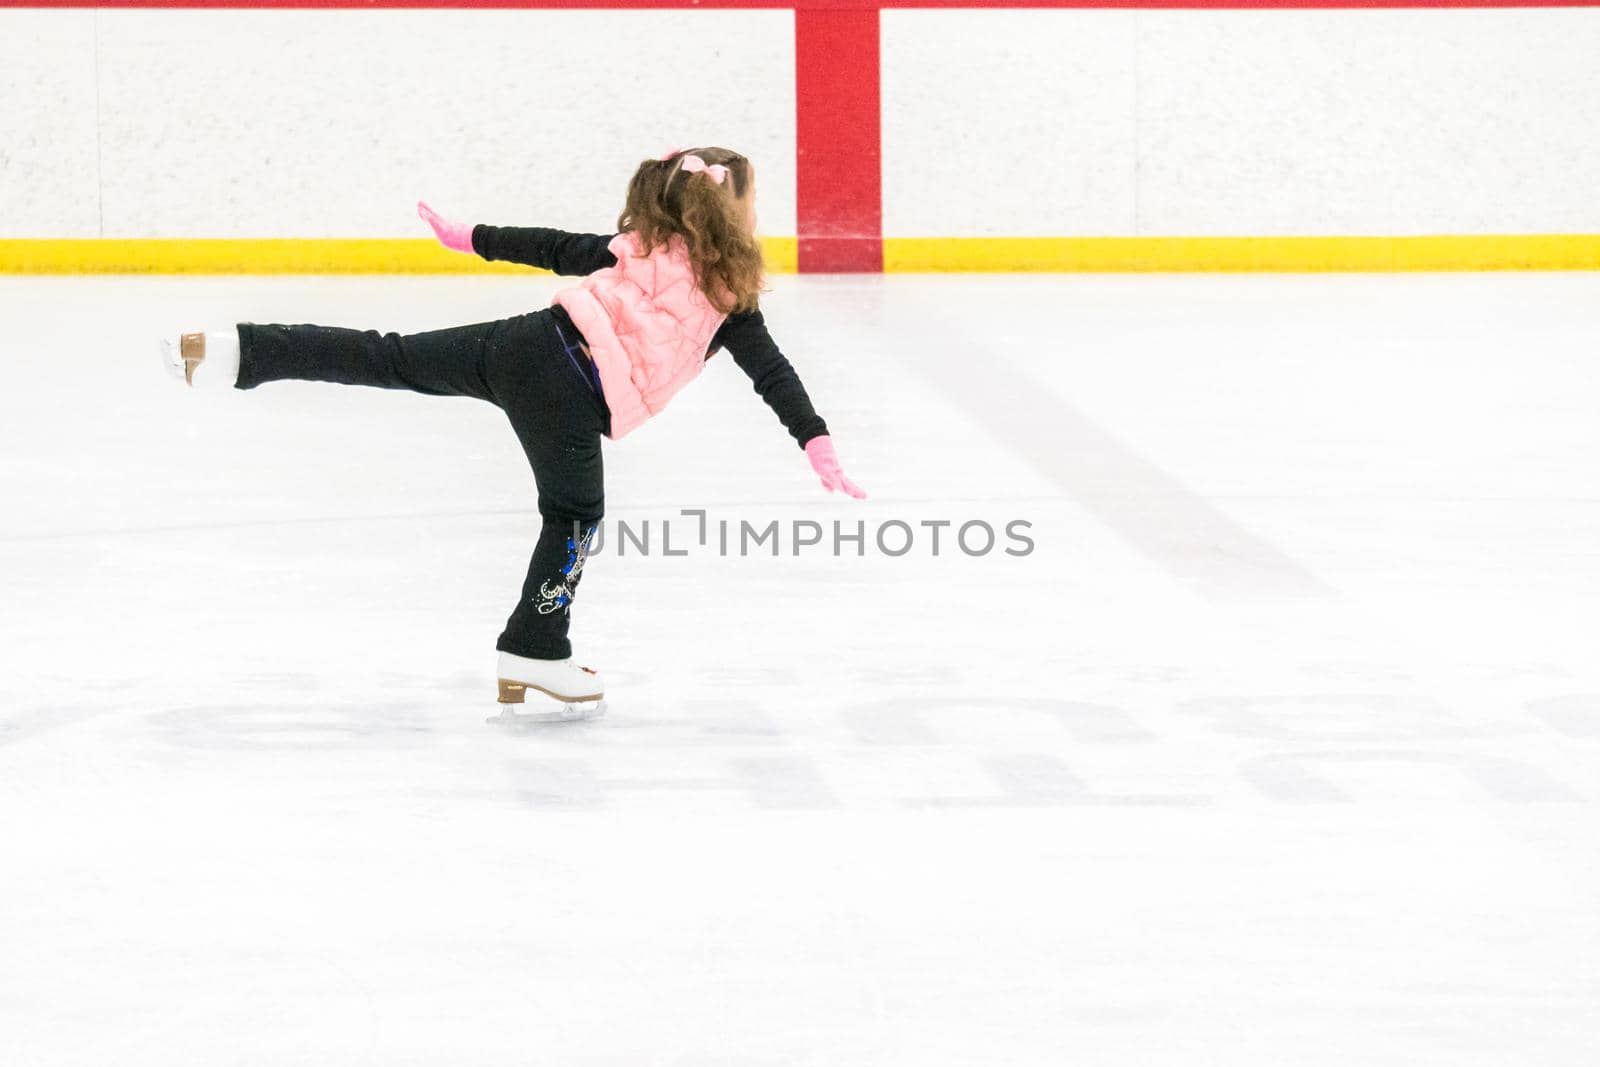 Little girl practicing figure skating moves on the indoor ice rink.